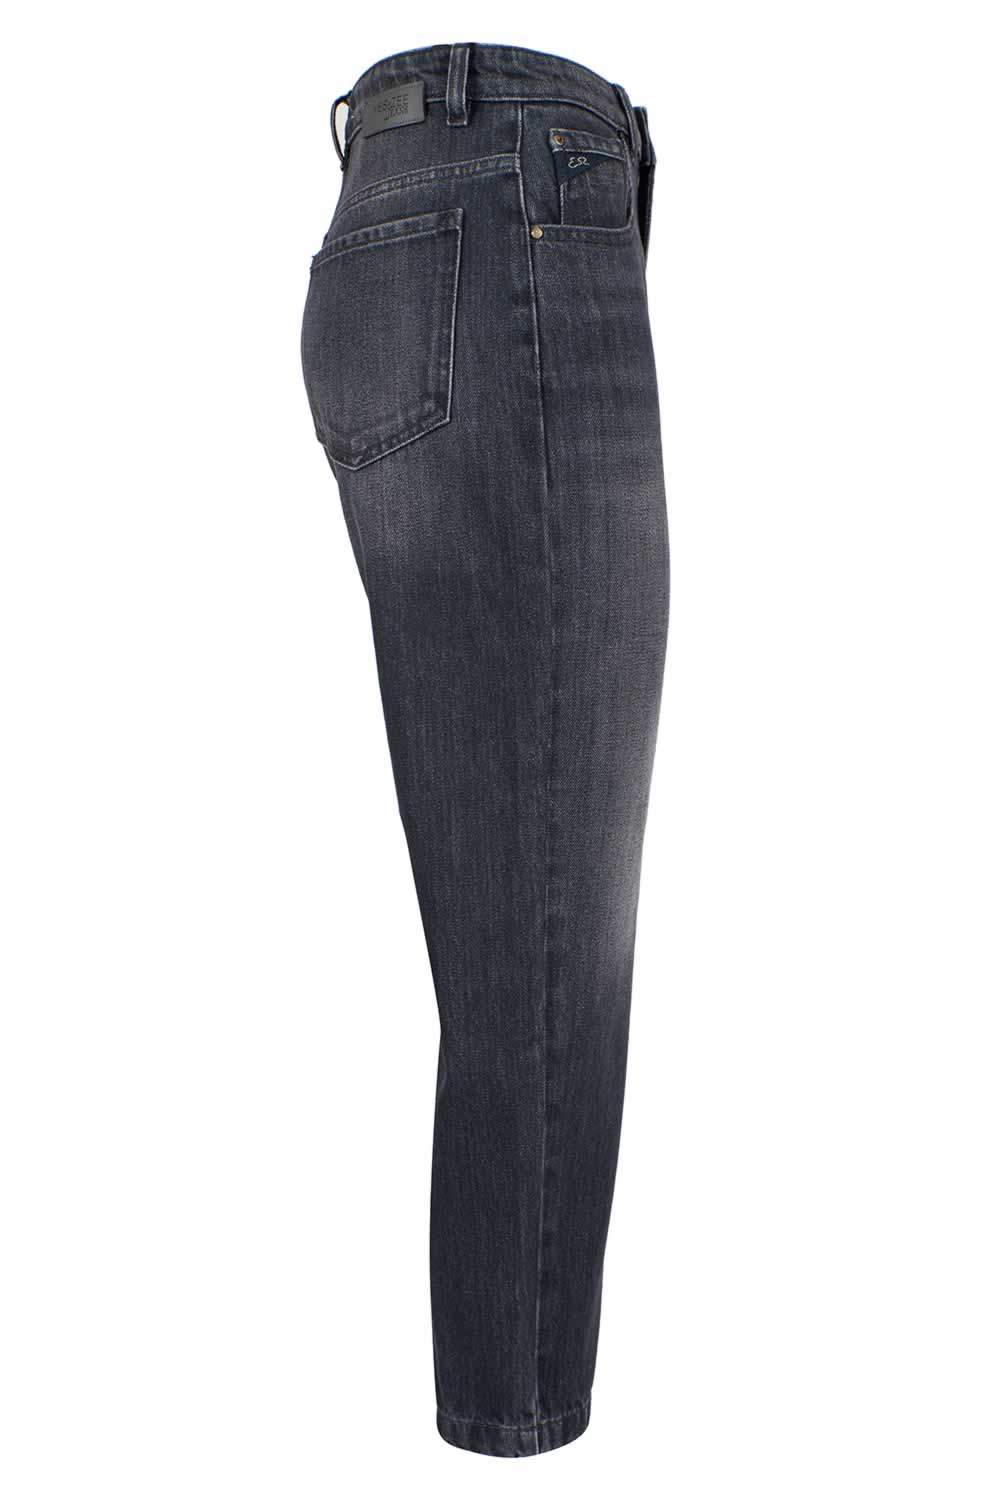 Yes Zee Black Cotton Jeans & Pant Black, feed-1, Jeans & Pants - Women - Clothing, W25 | IT39, W26 | IT40, W27 | IT41, W28 | IT42, W29 | IT43, W30 | IT44, W31 | IT45, W32 | IT46, Yes Zee at SEYMAYKA